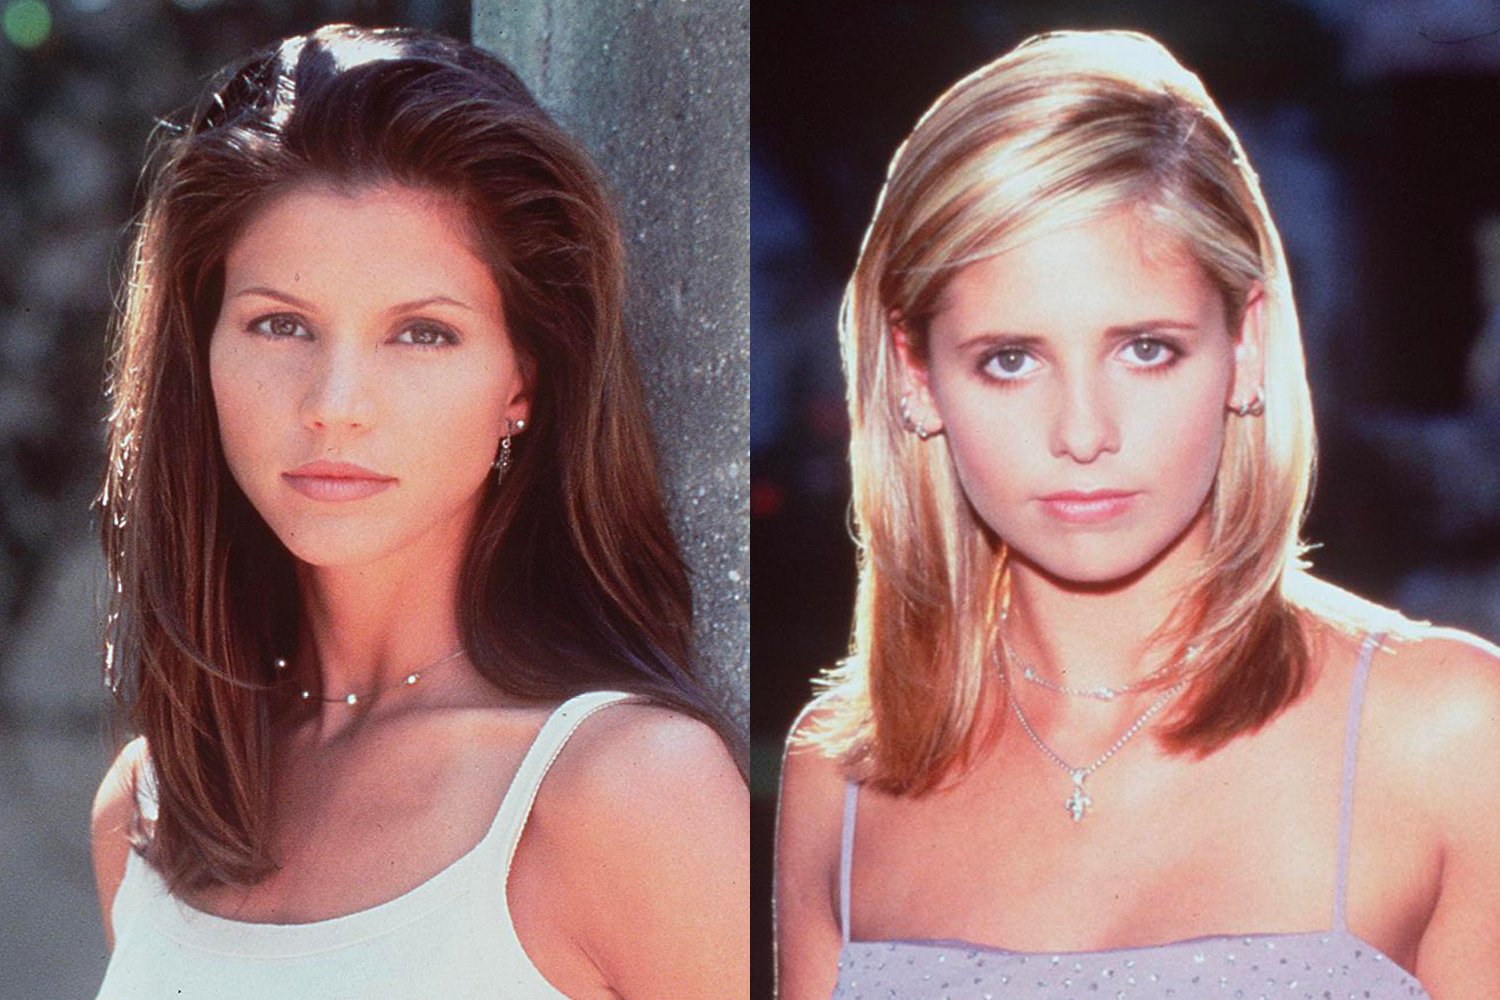 ‘Buffy the Vampire Slayer’: Sarah Michelle Gellar Breaks Silence After Charisma Carpenter Accuses Joss Whedon of Toxicity